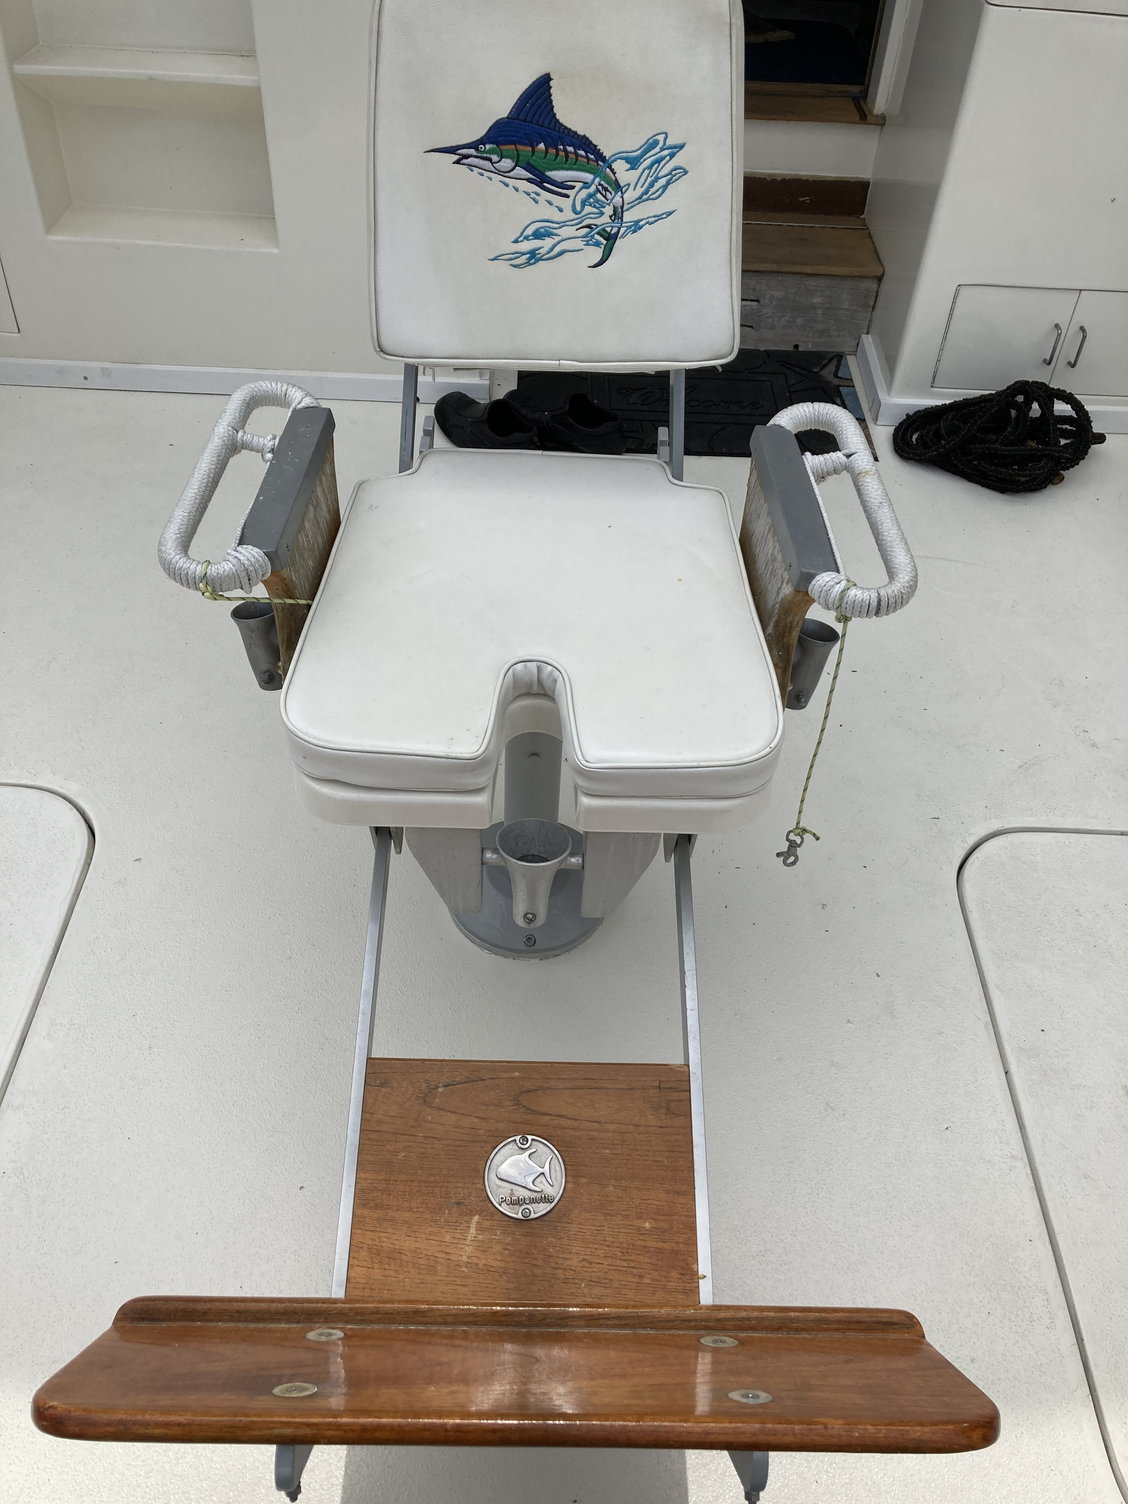 Sell - Pompanette Fighting Chair - The Hull Truth - Boating and Fishing  Forum